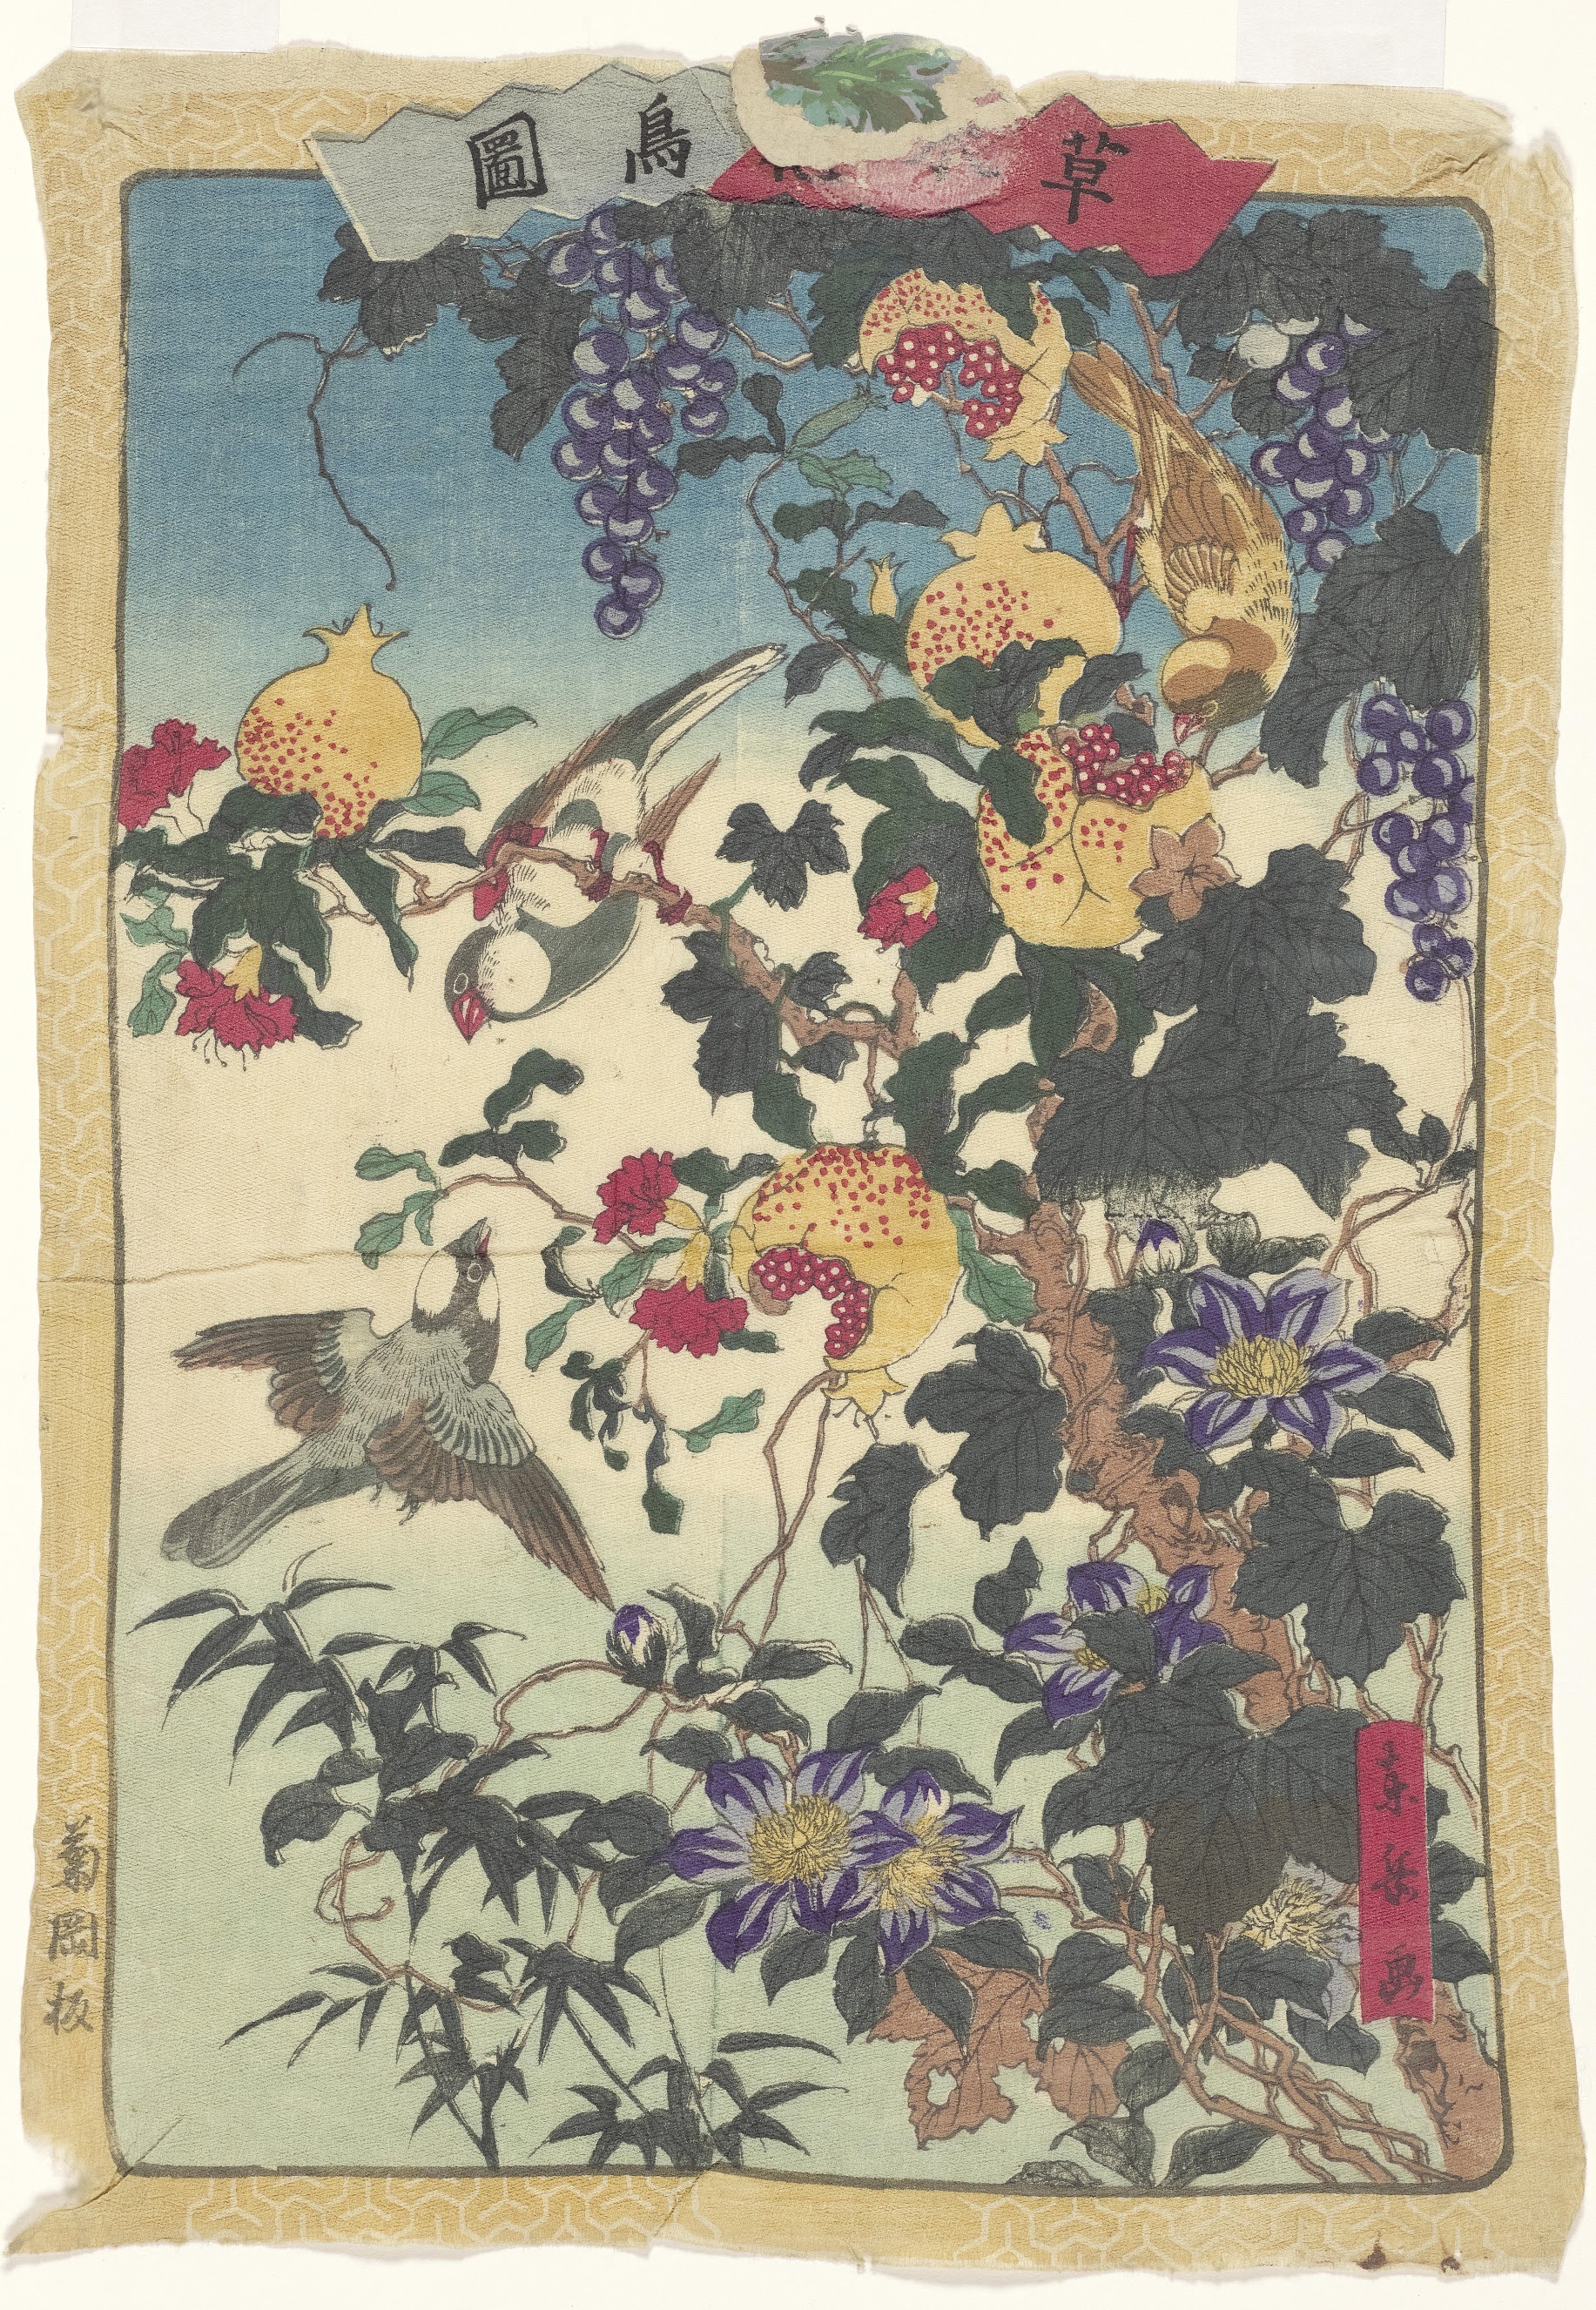 Finches and Pomegranates, from the series Illustrations of Plants, Trees, Flowers and Birds Tokyo, c. 1875 Togaku